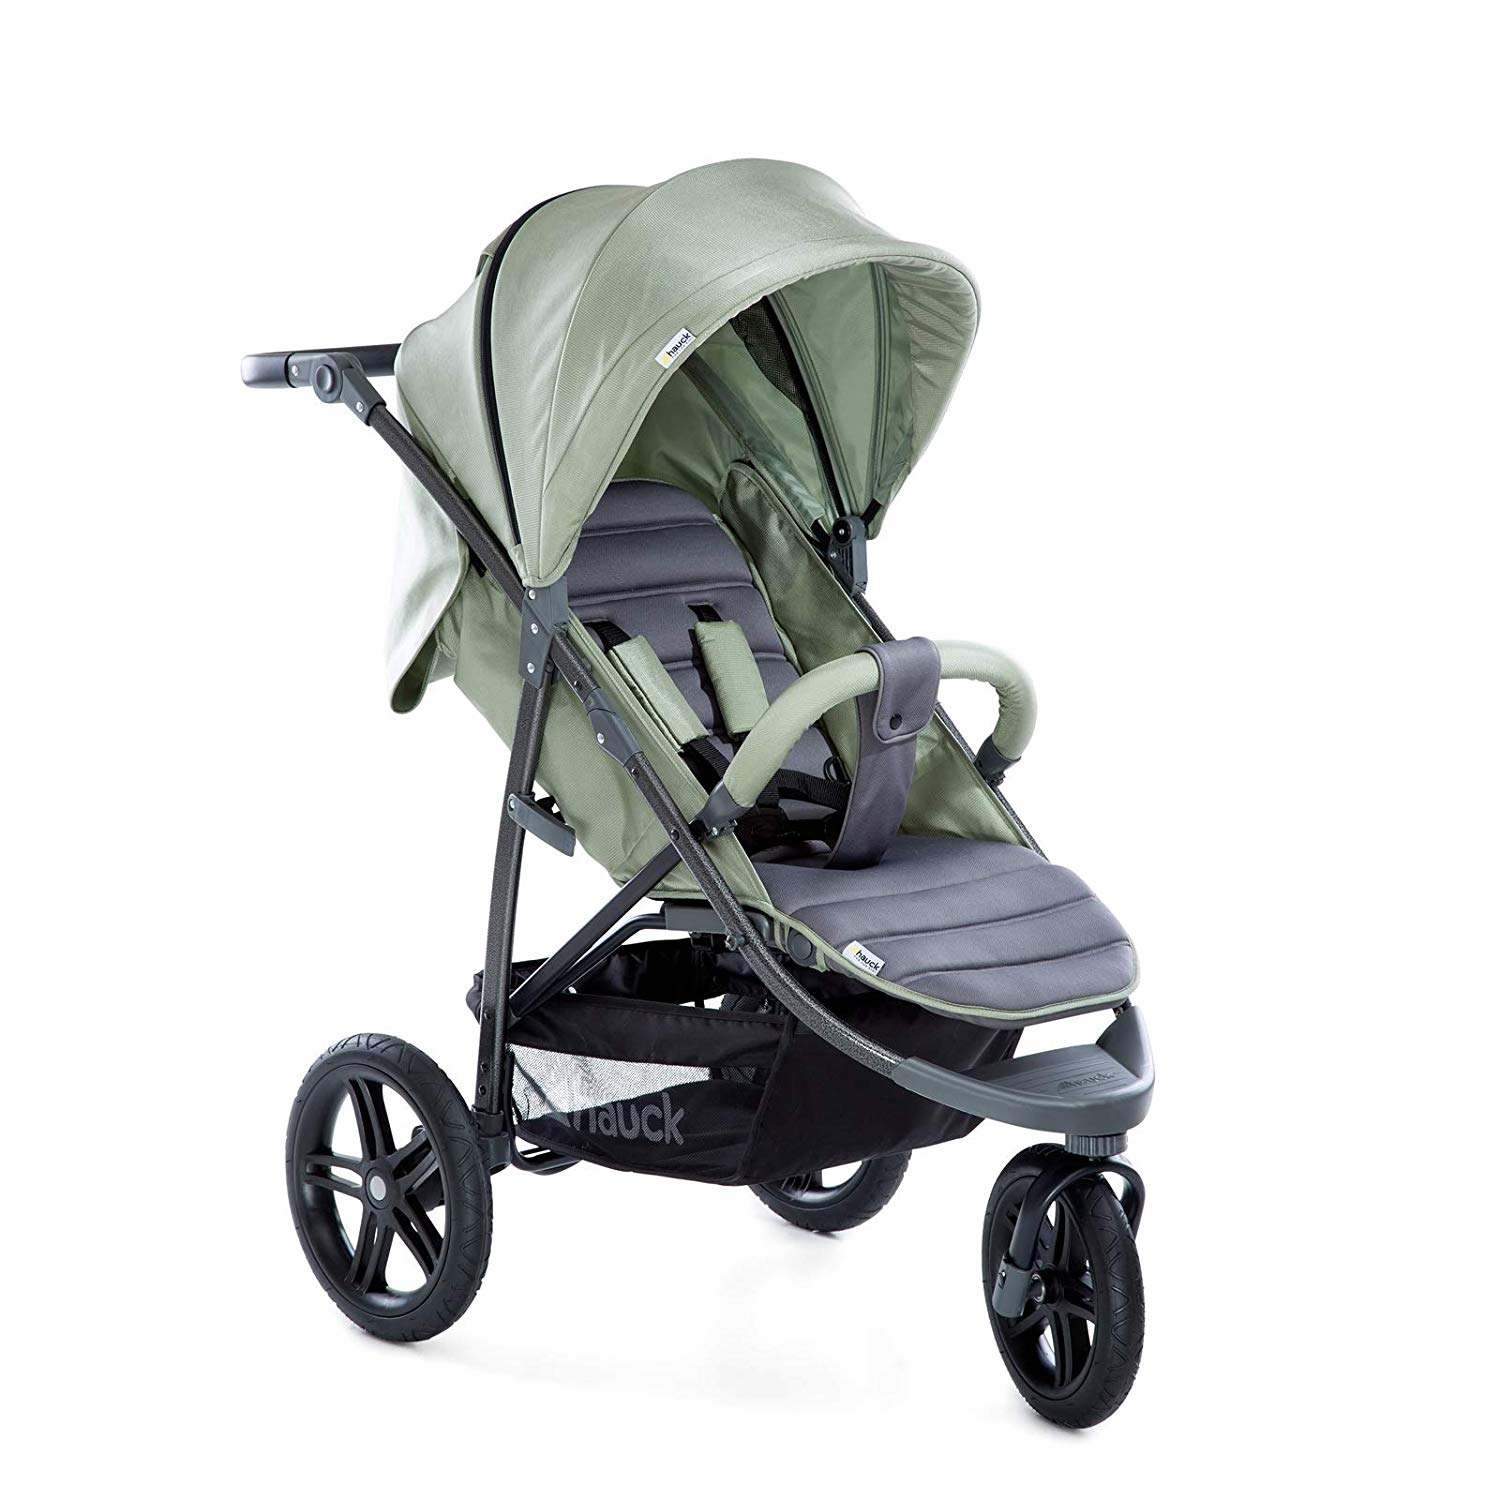 Hauck Rapid 3R tricycle buggy / XL sun hood / load capacity up to 25 kg / quick folding / height adjustable / lying position / large all terrain wheels / drinks holder / oil green grey